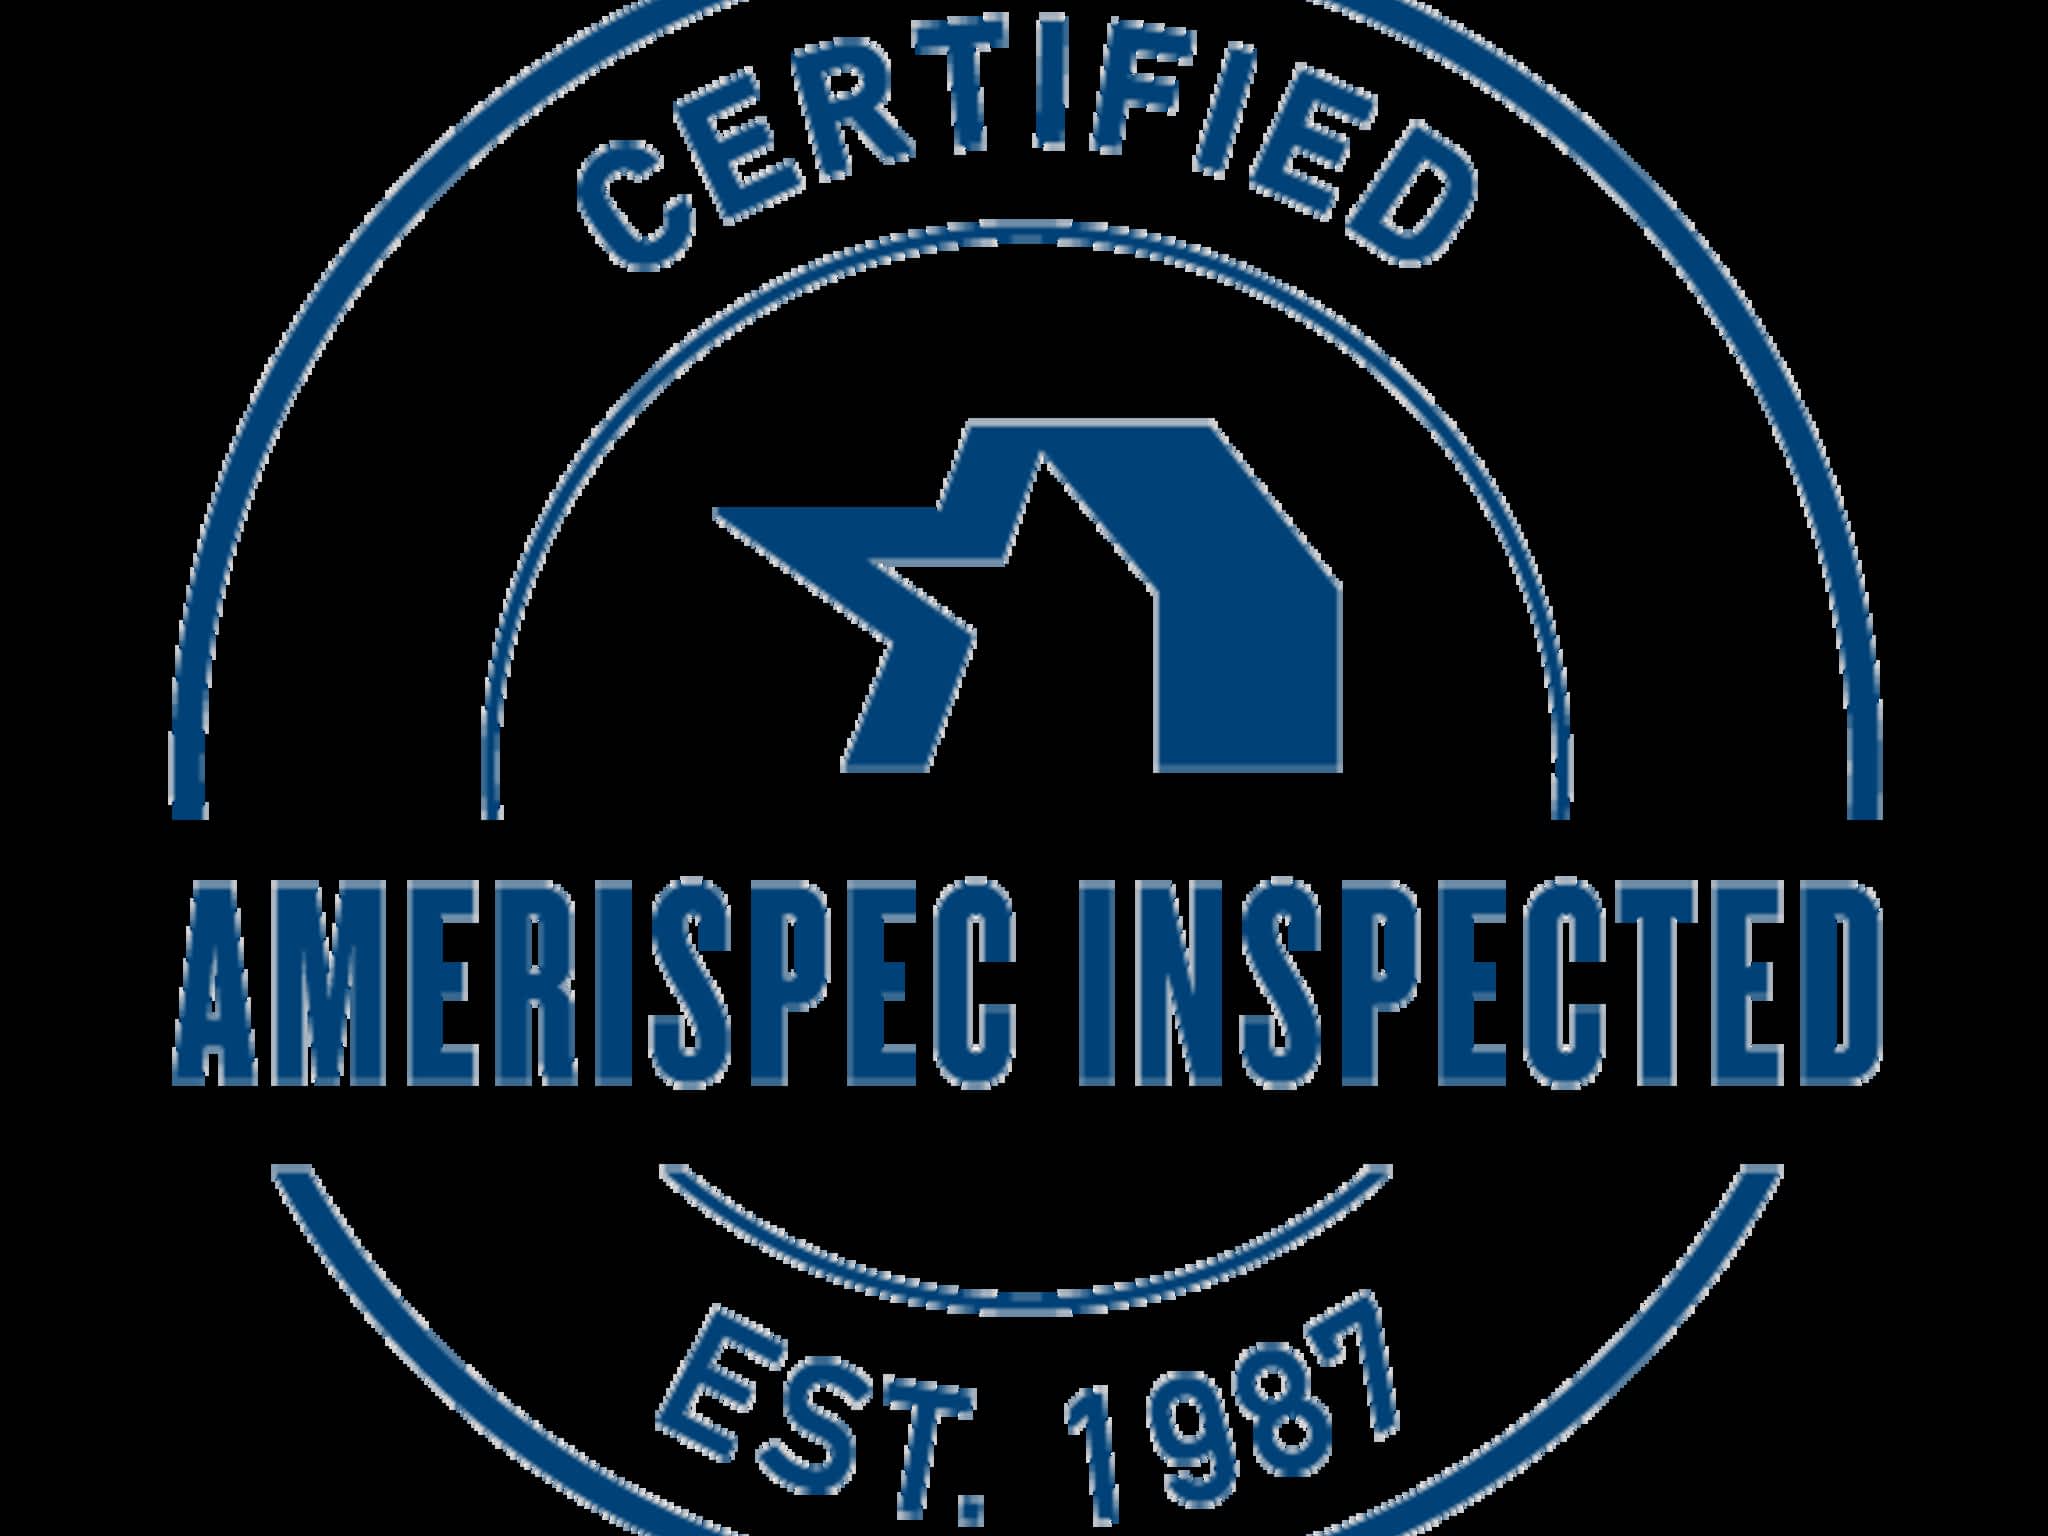 photo AmeriSpec Inspection Services of Calgary North West & Red Deer